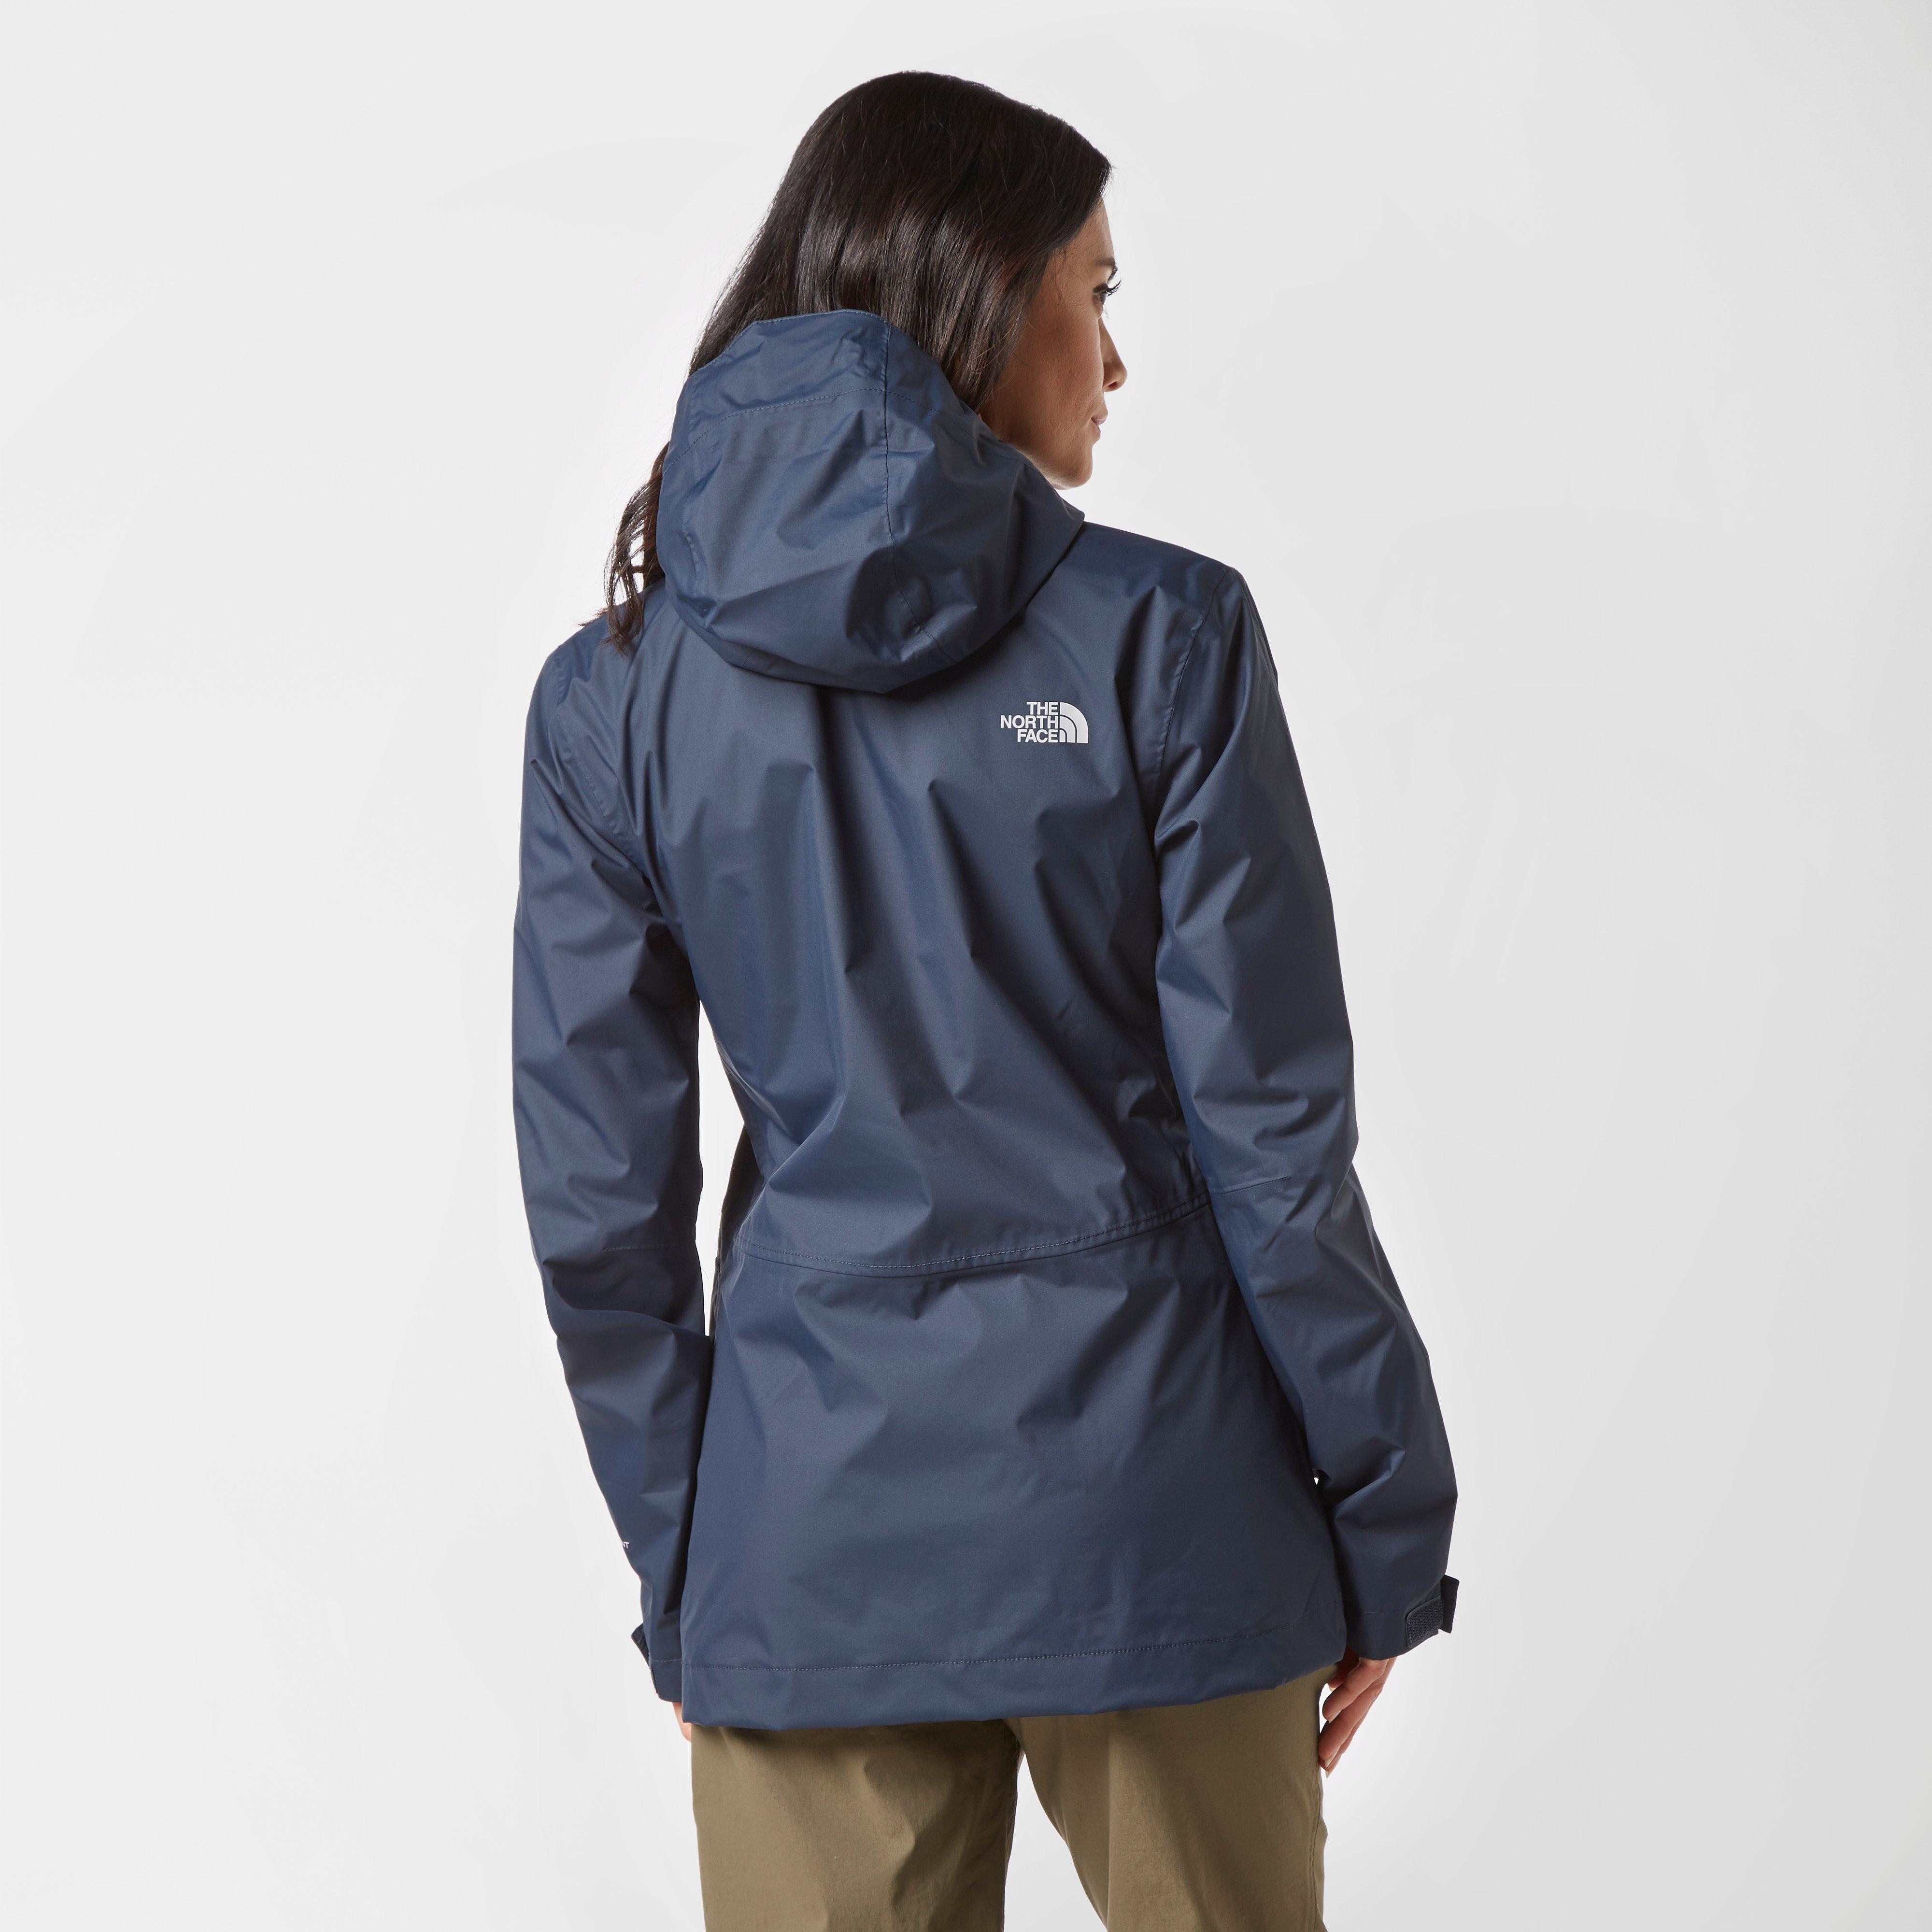 north face exhale jacket review